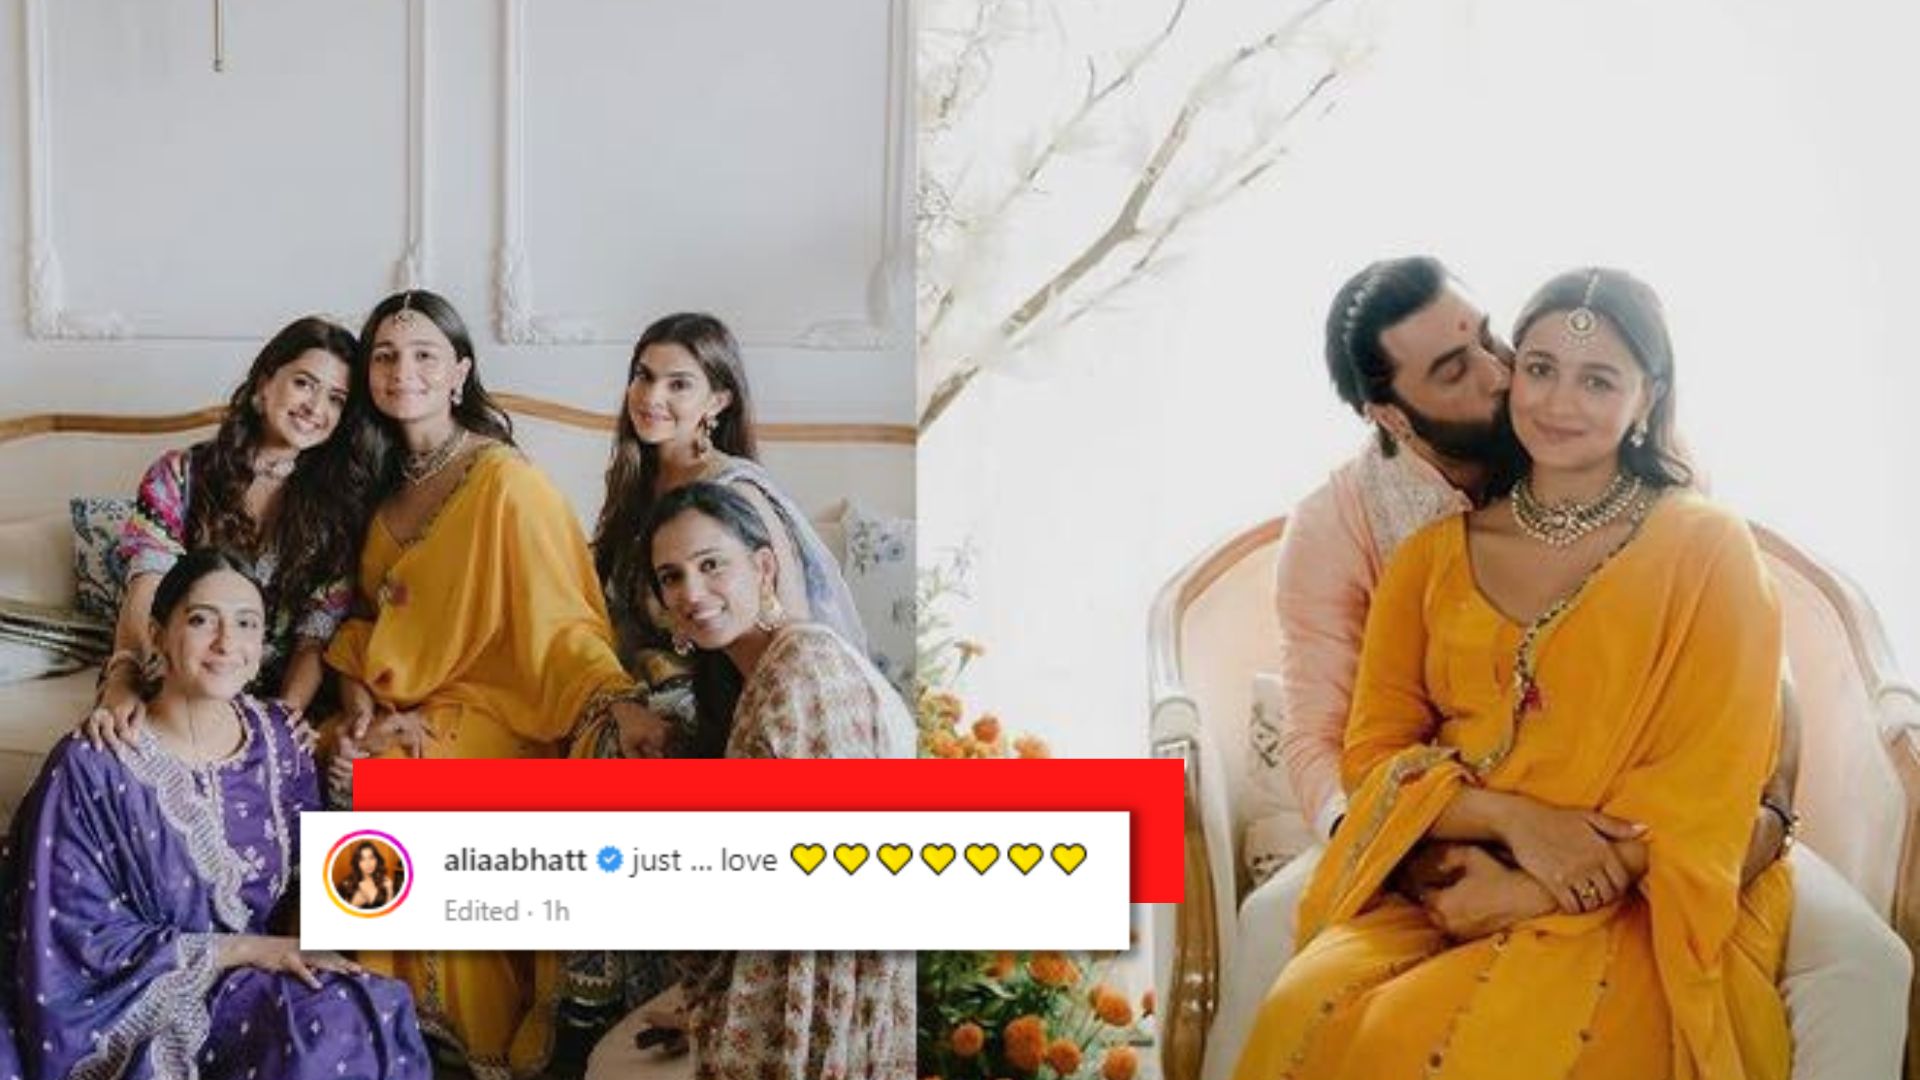 Alia Bhatt’s Baby Shower With Family And Friends Was All About Smiles, Peace And Of Course…Love!